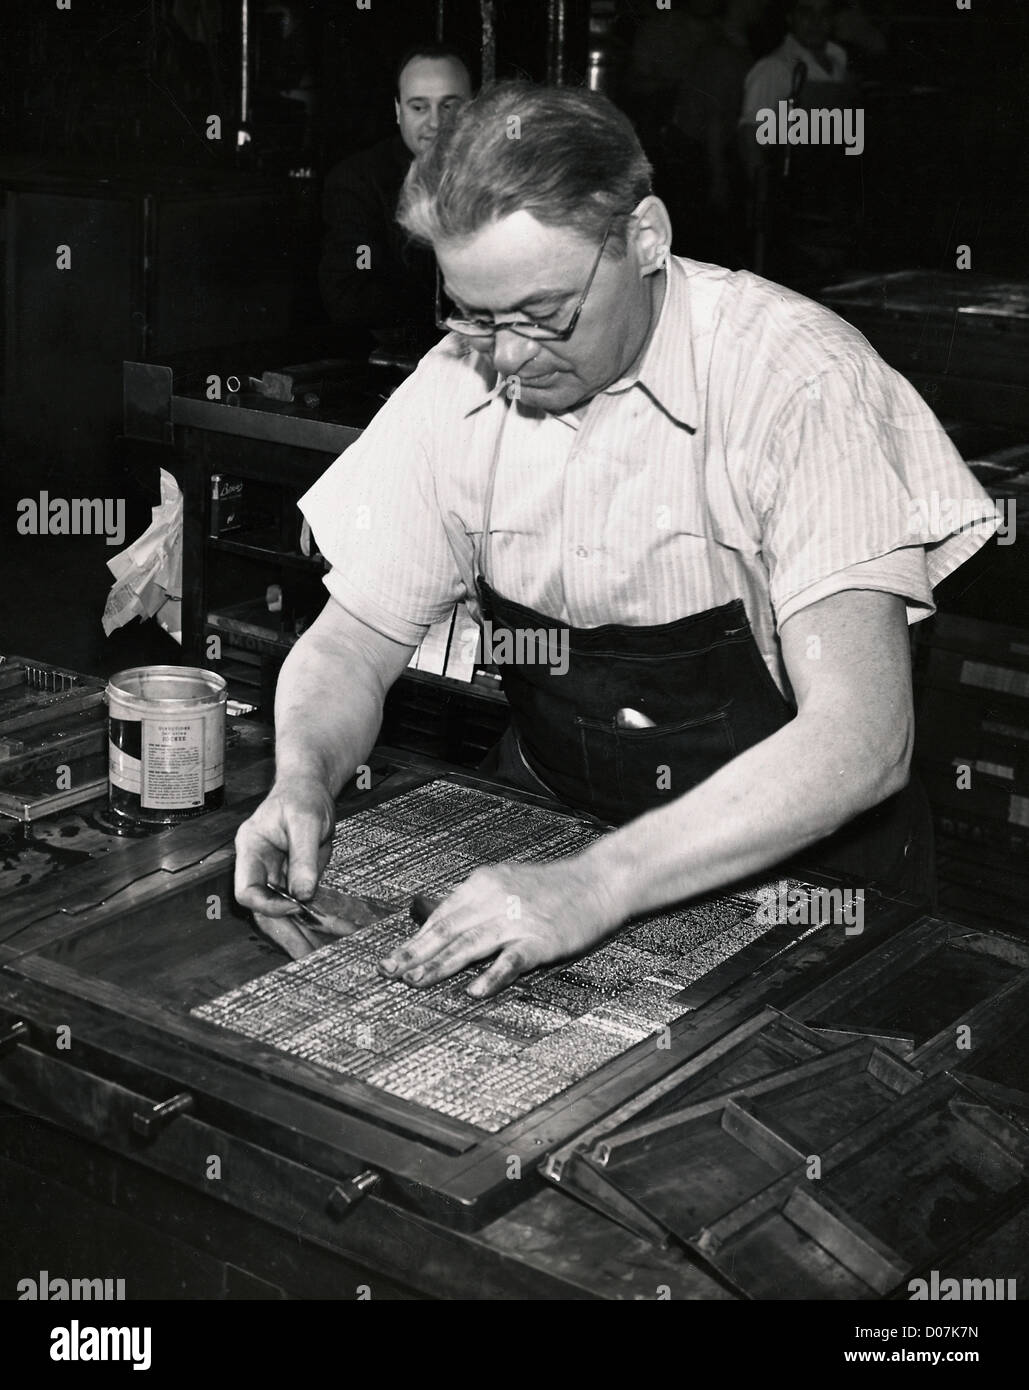 Workman in process of making newspaper plate Stock Photo